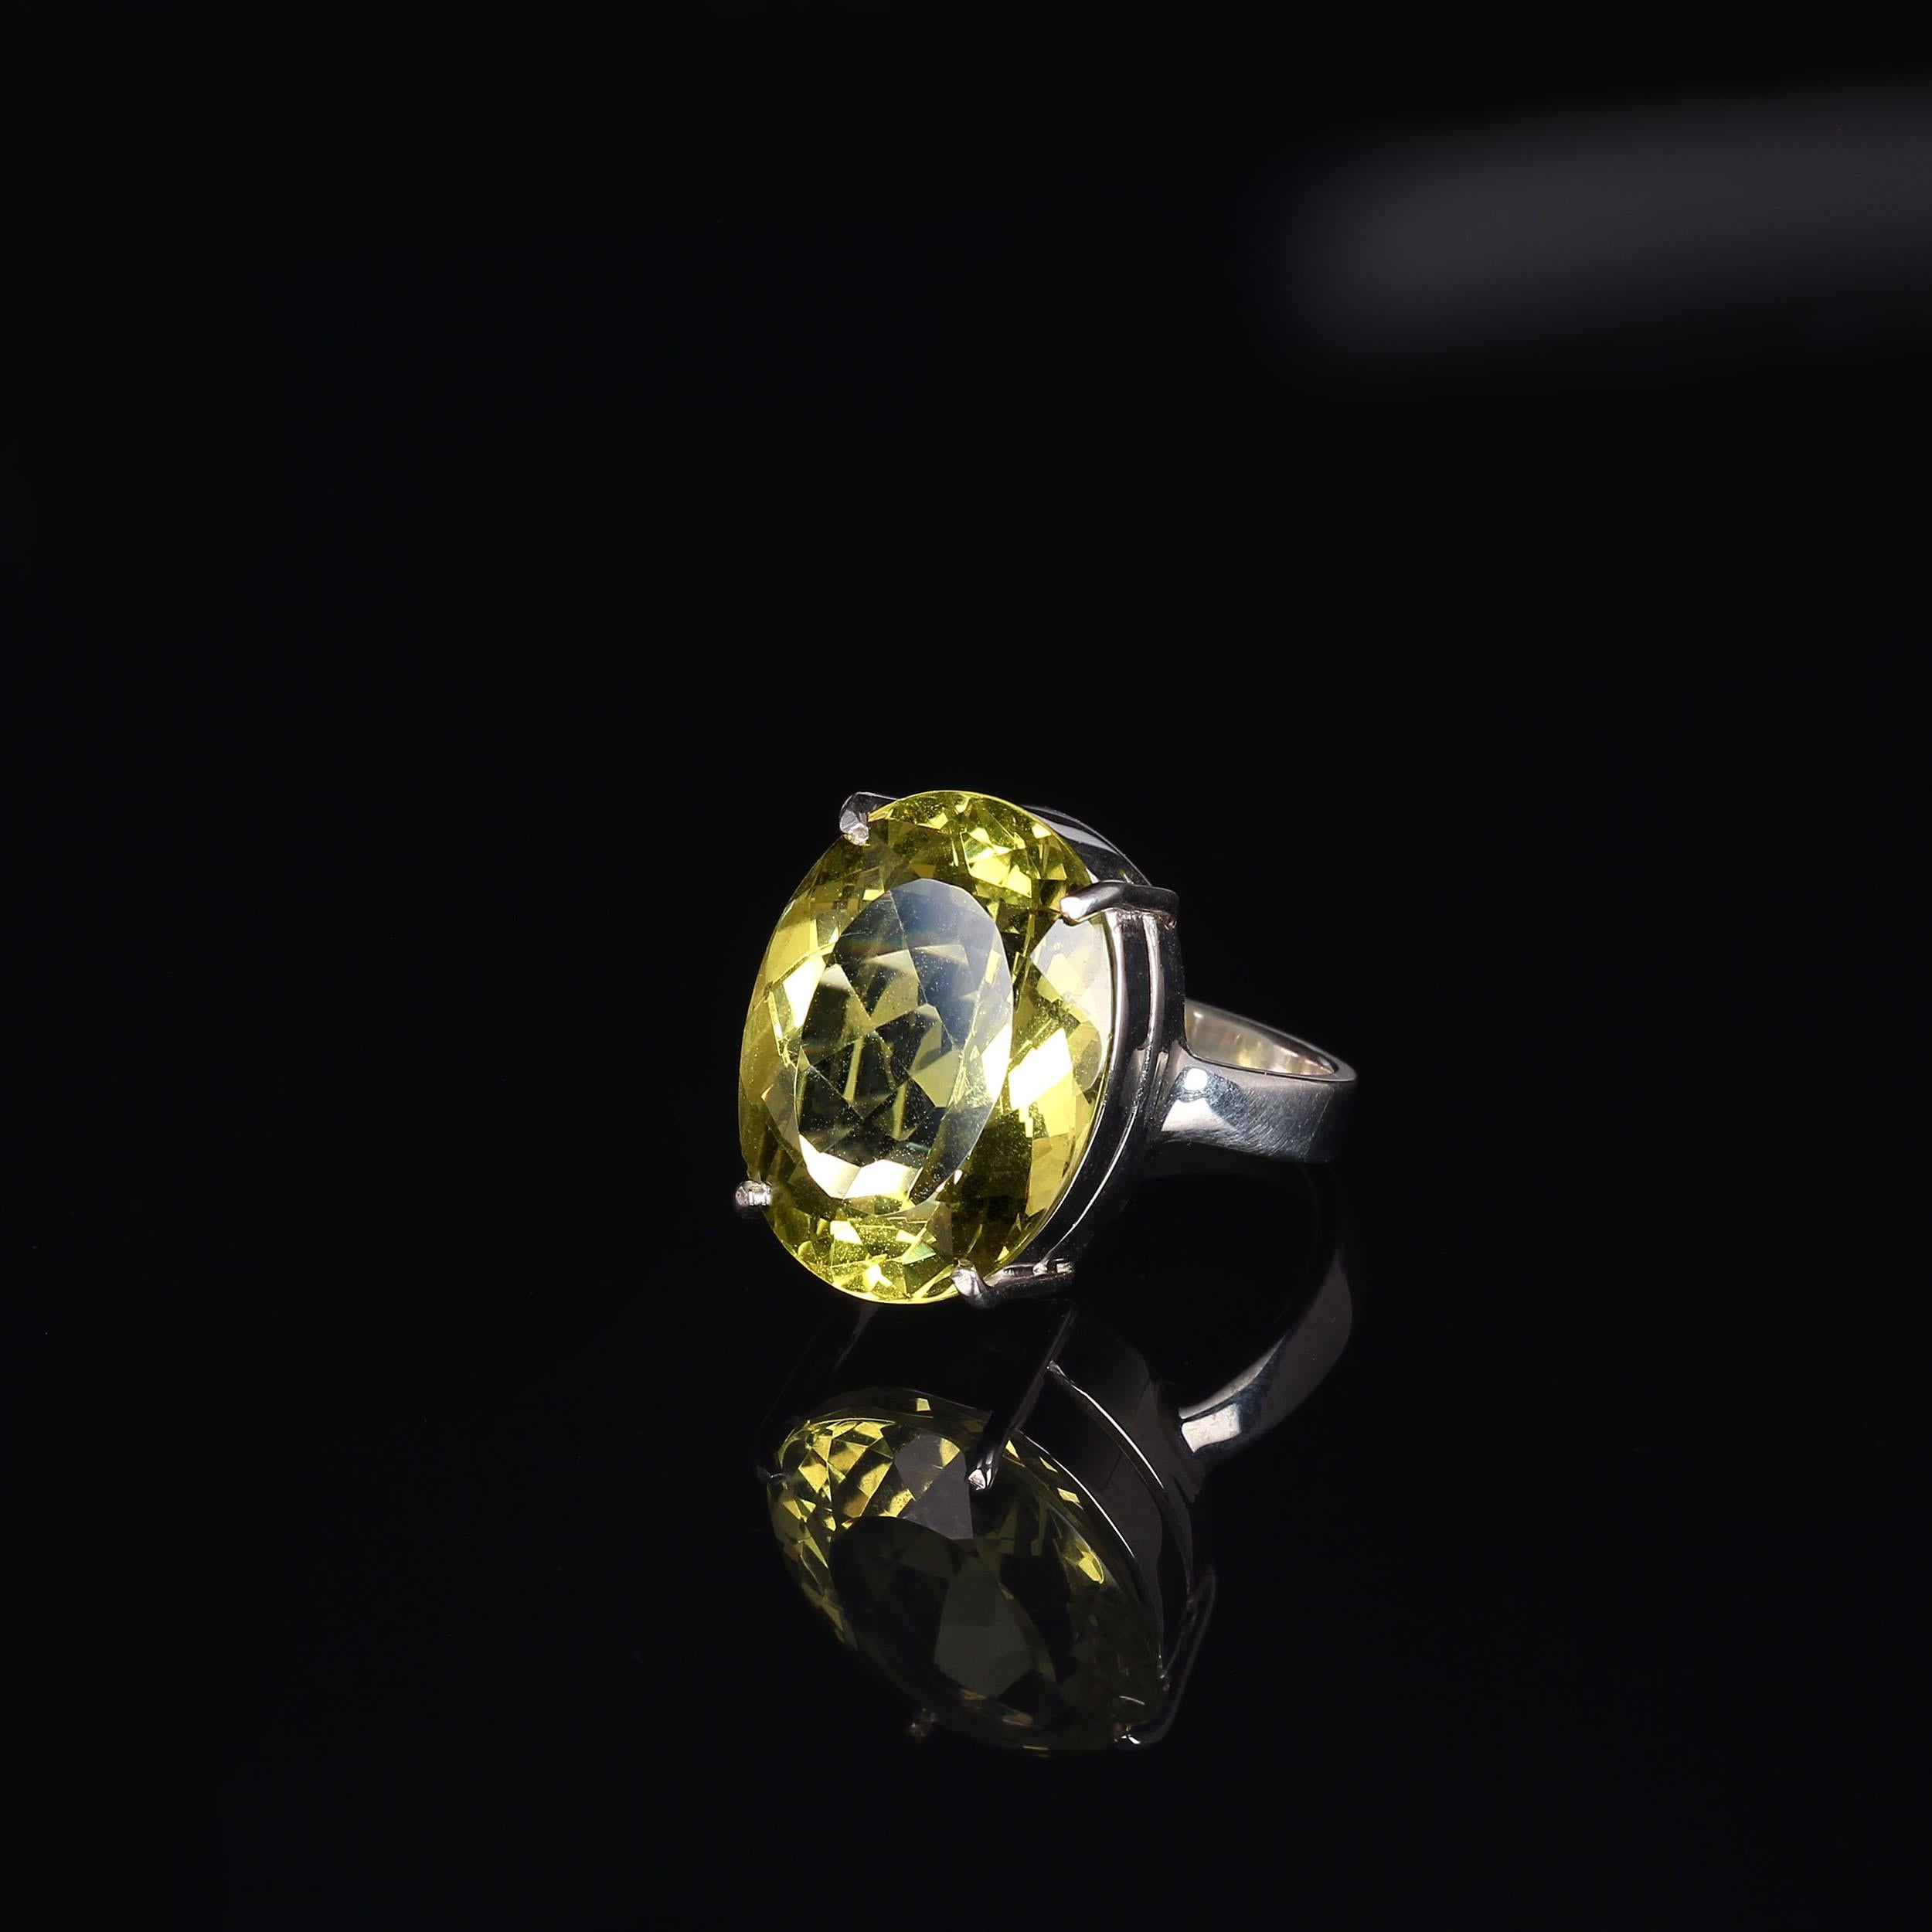 Oval Cut AJD Sparkling Oval Lemon Quartz in Sterling Silver Ring 14.85 Carats Great Gift!